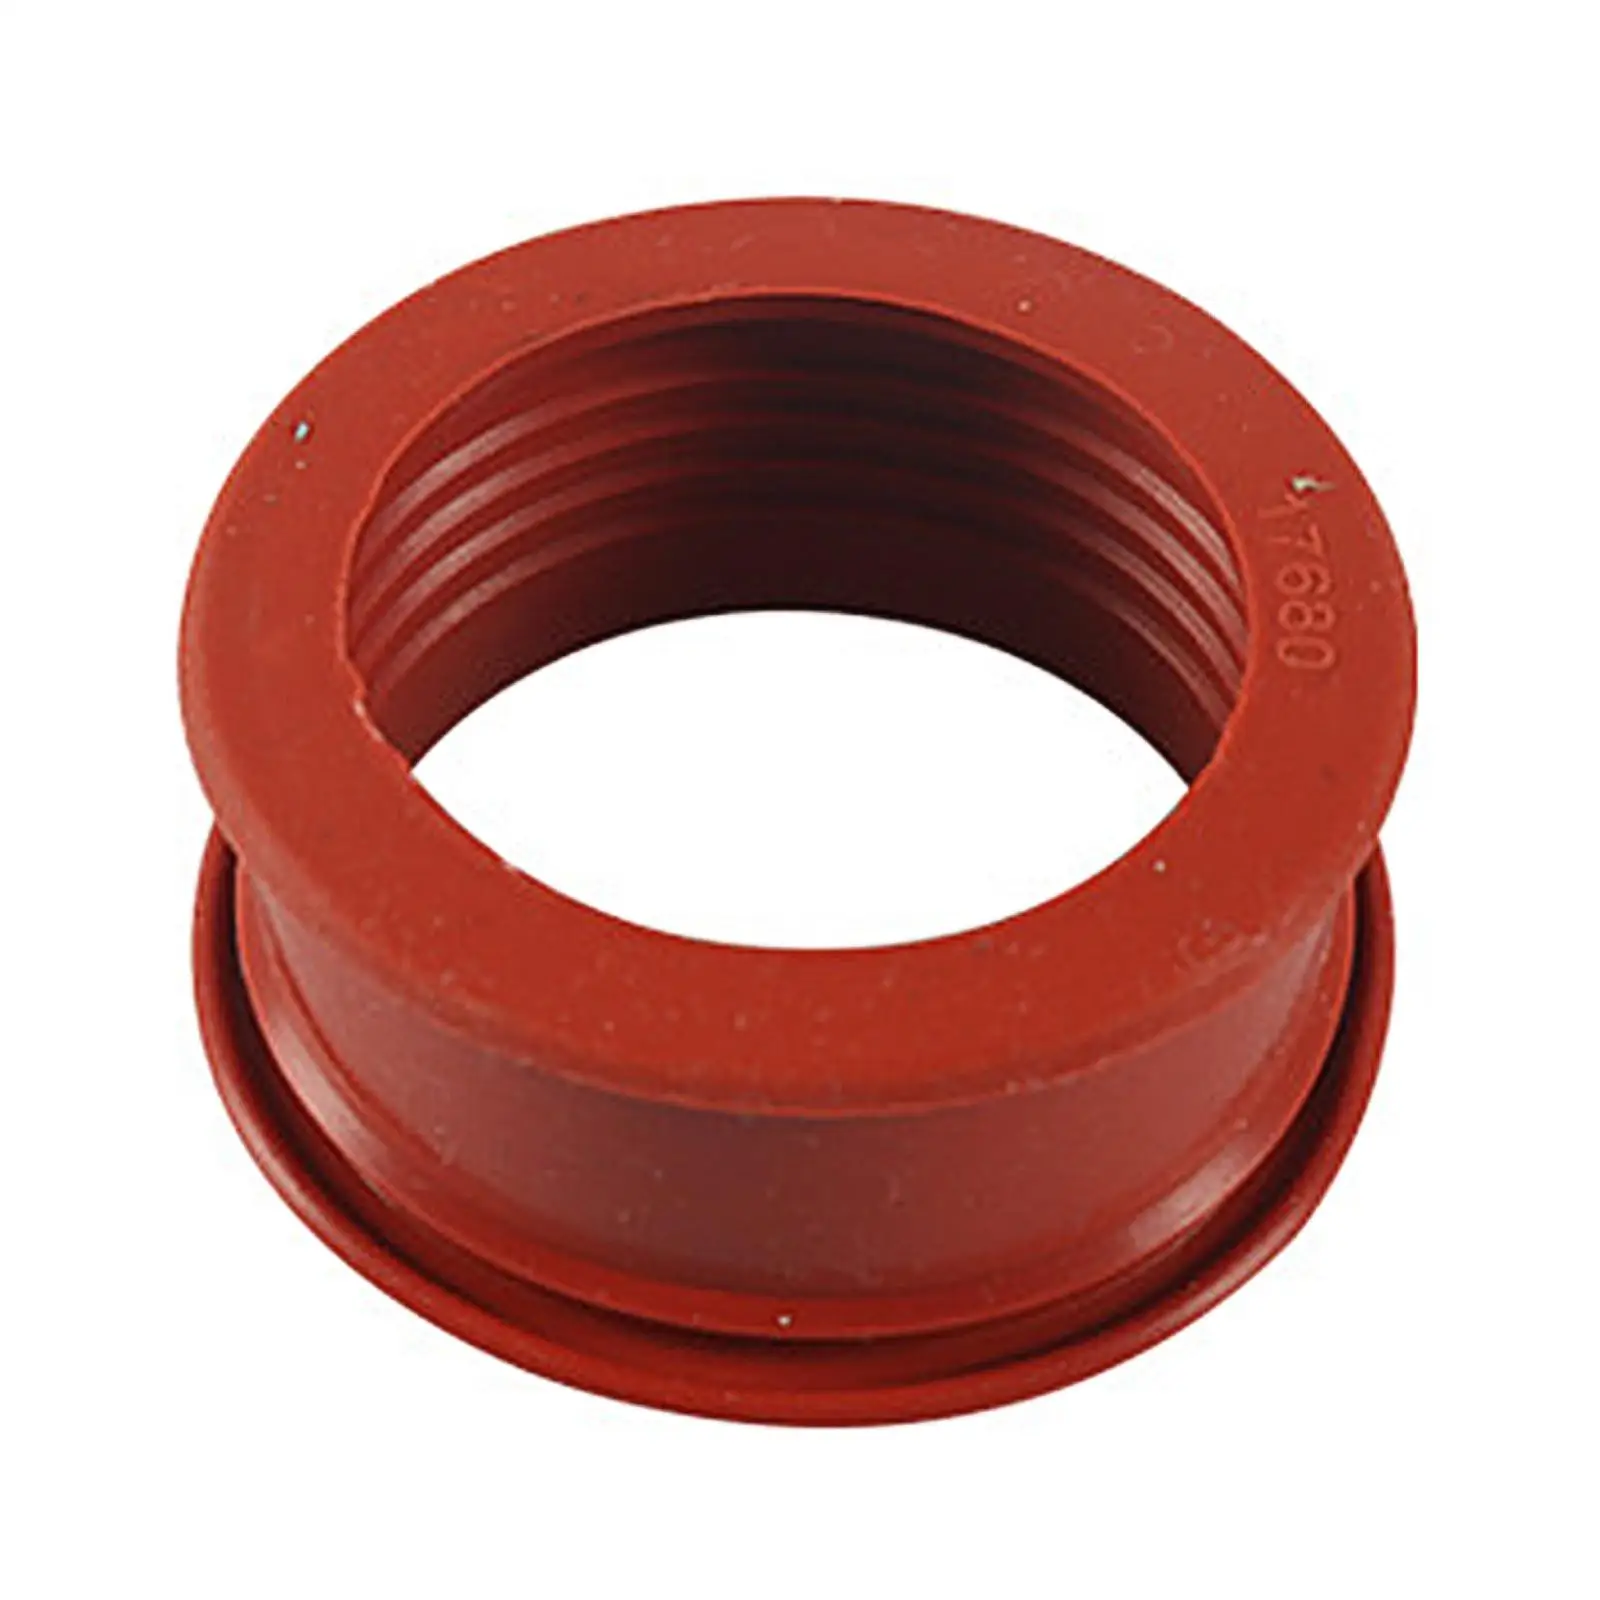 Hose Pipes Sleeve 1434C8 for 206 Replacement Car Accessory